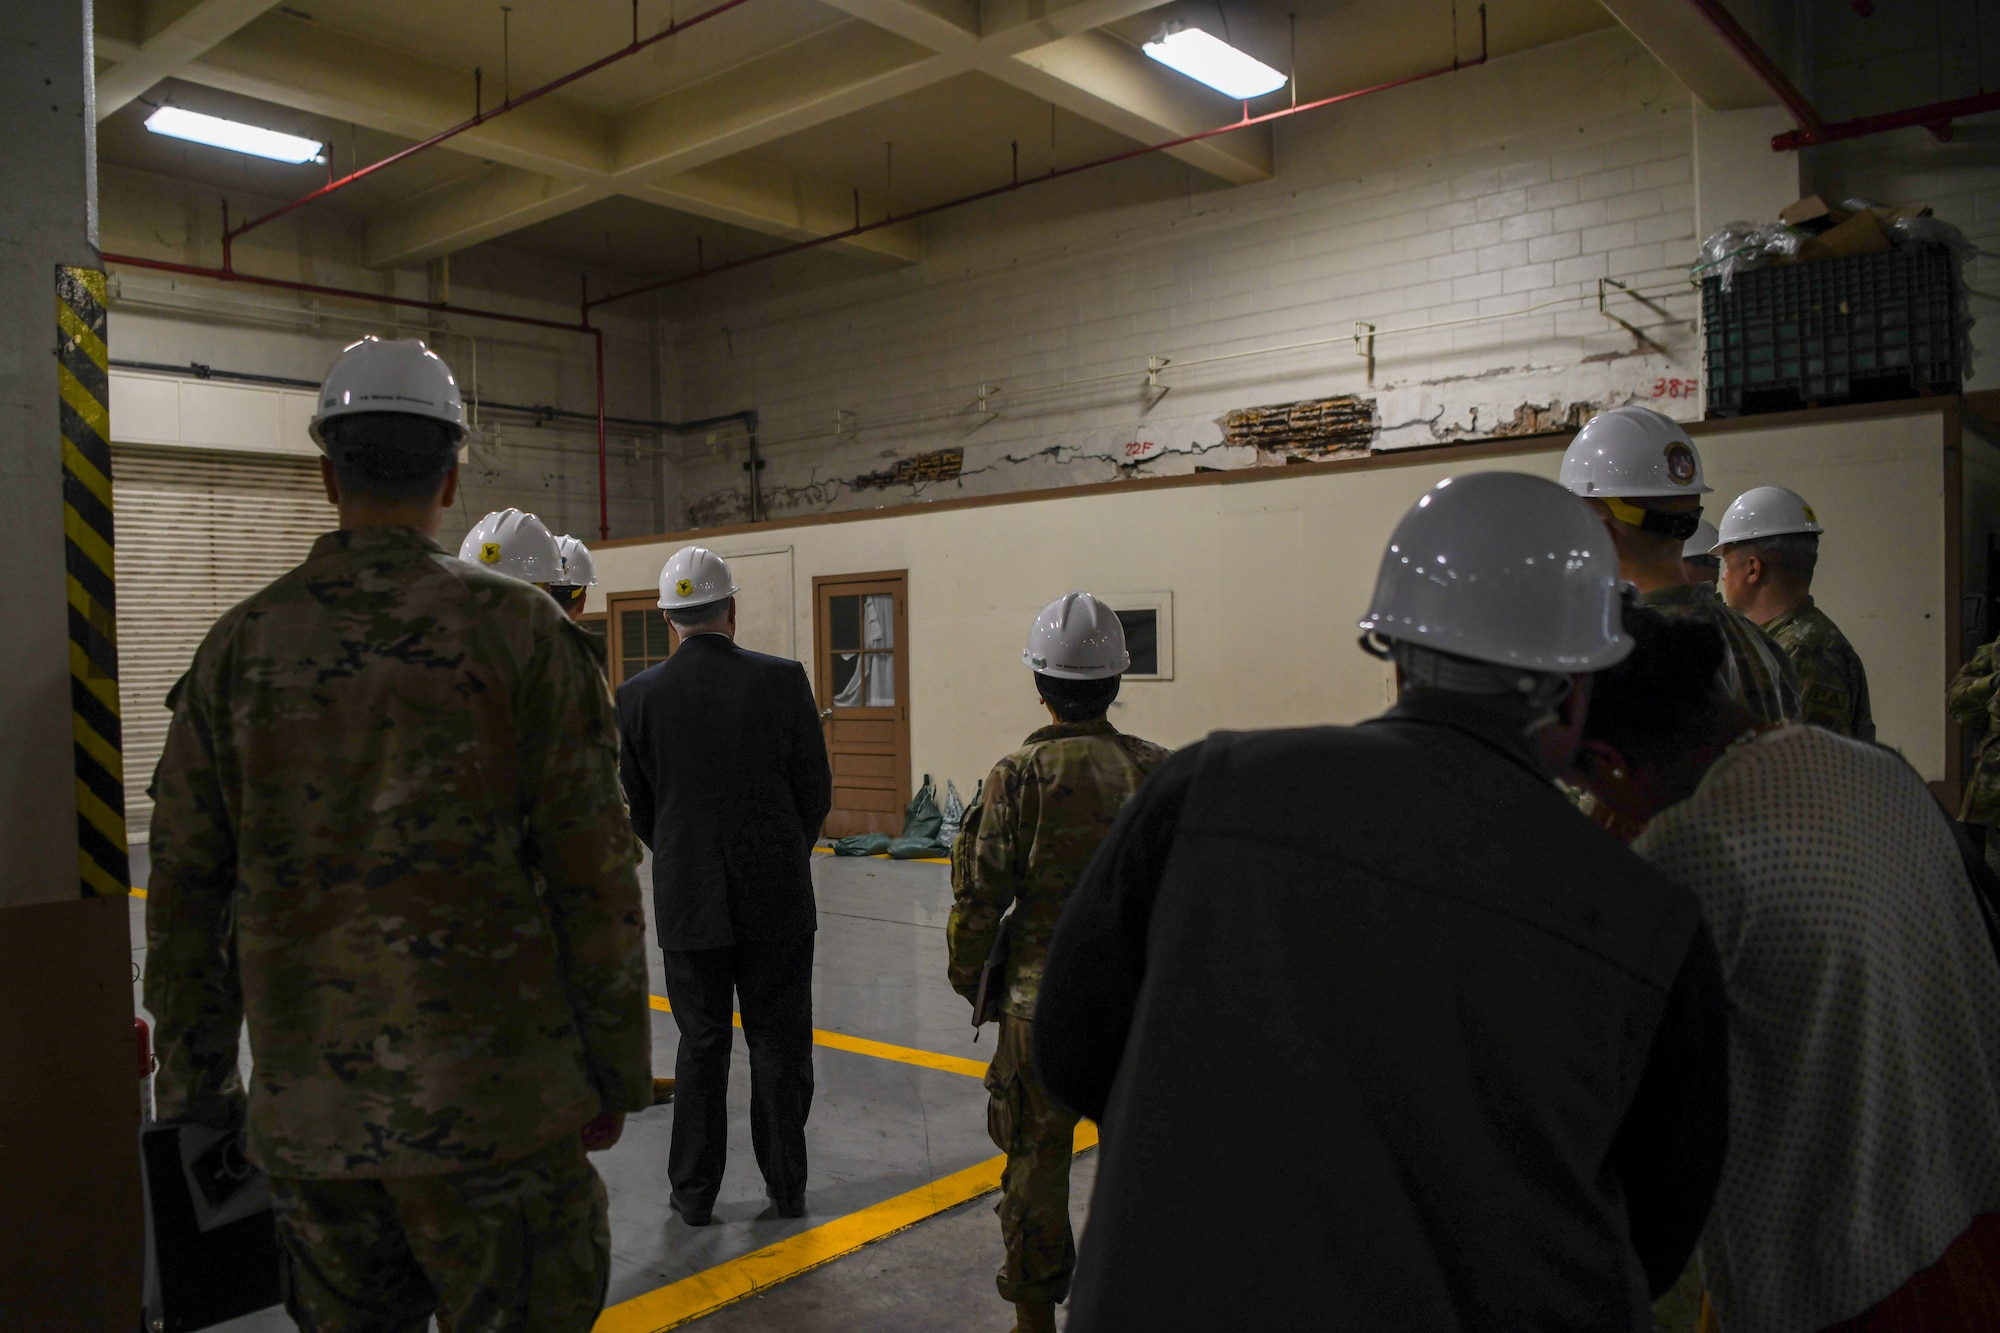 SecAF inspects a damaged facility.